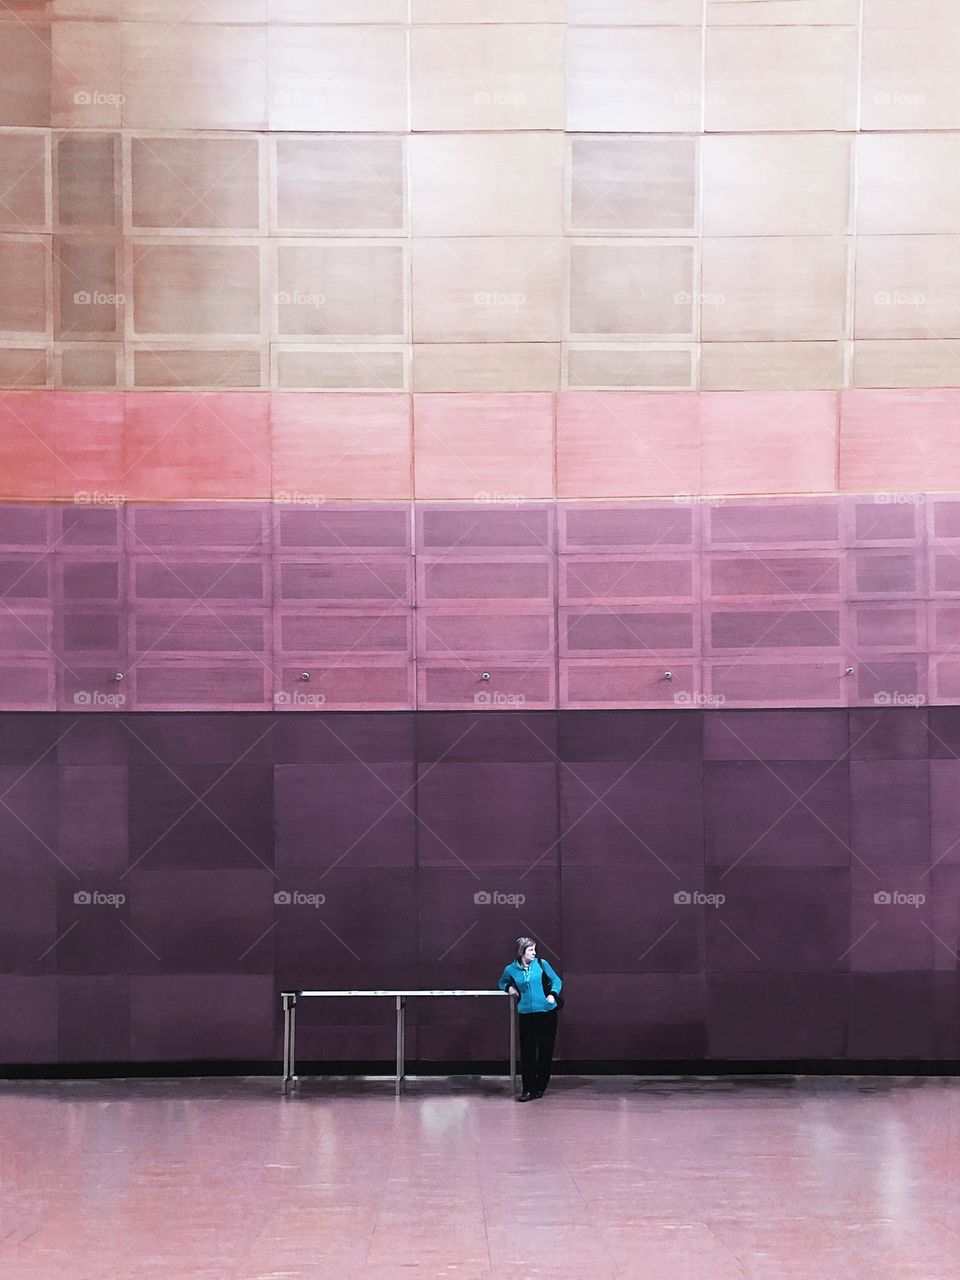 Tiny human in front of a geometric wall 